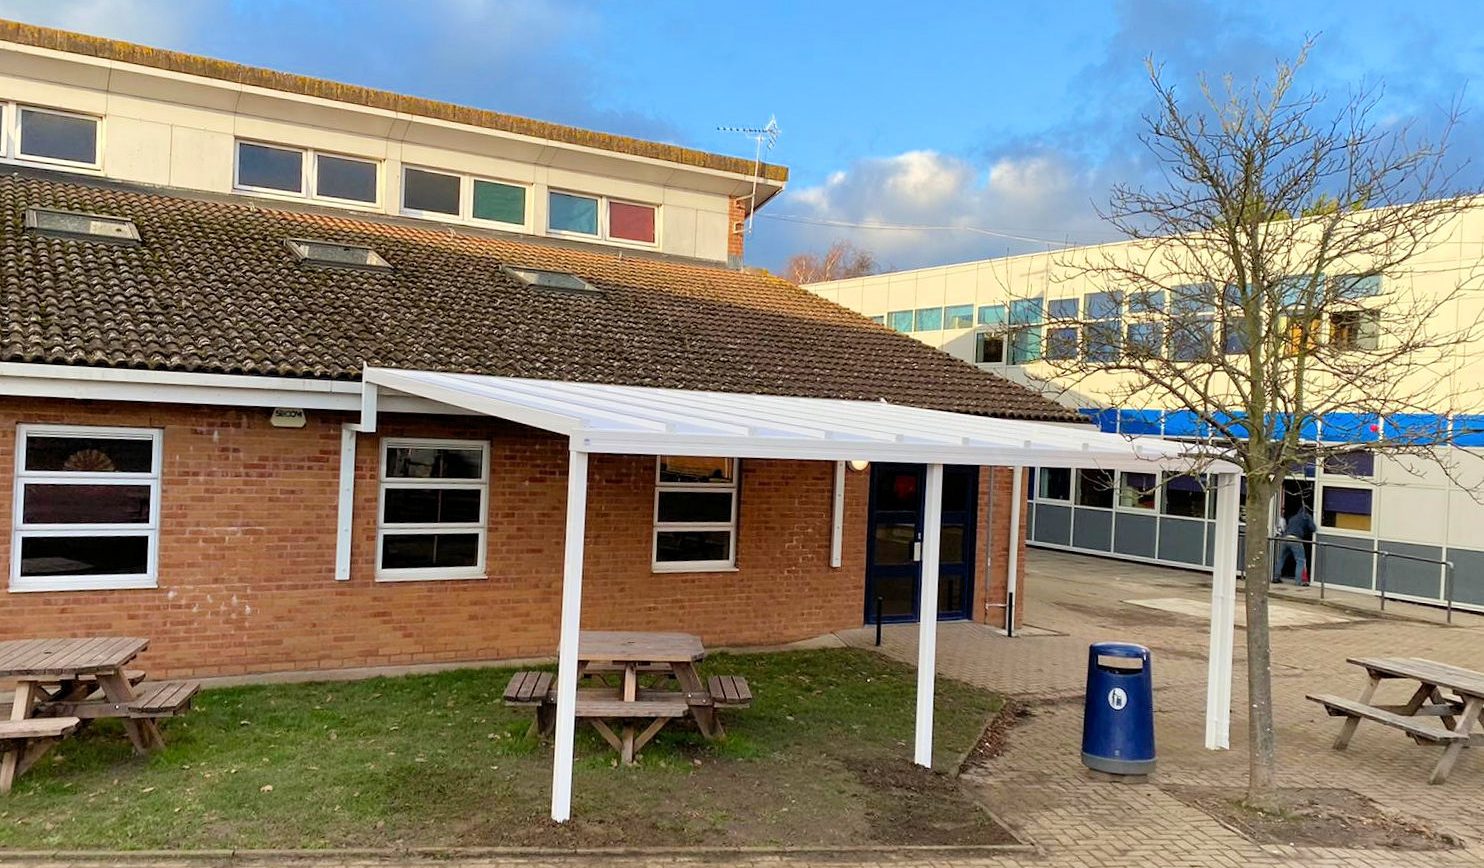 Shenfield High School – Wall Mounted Canopies